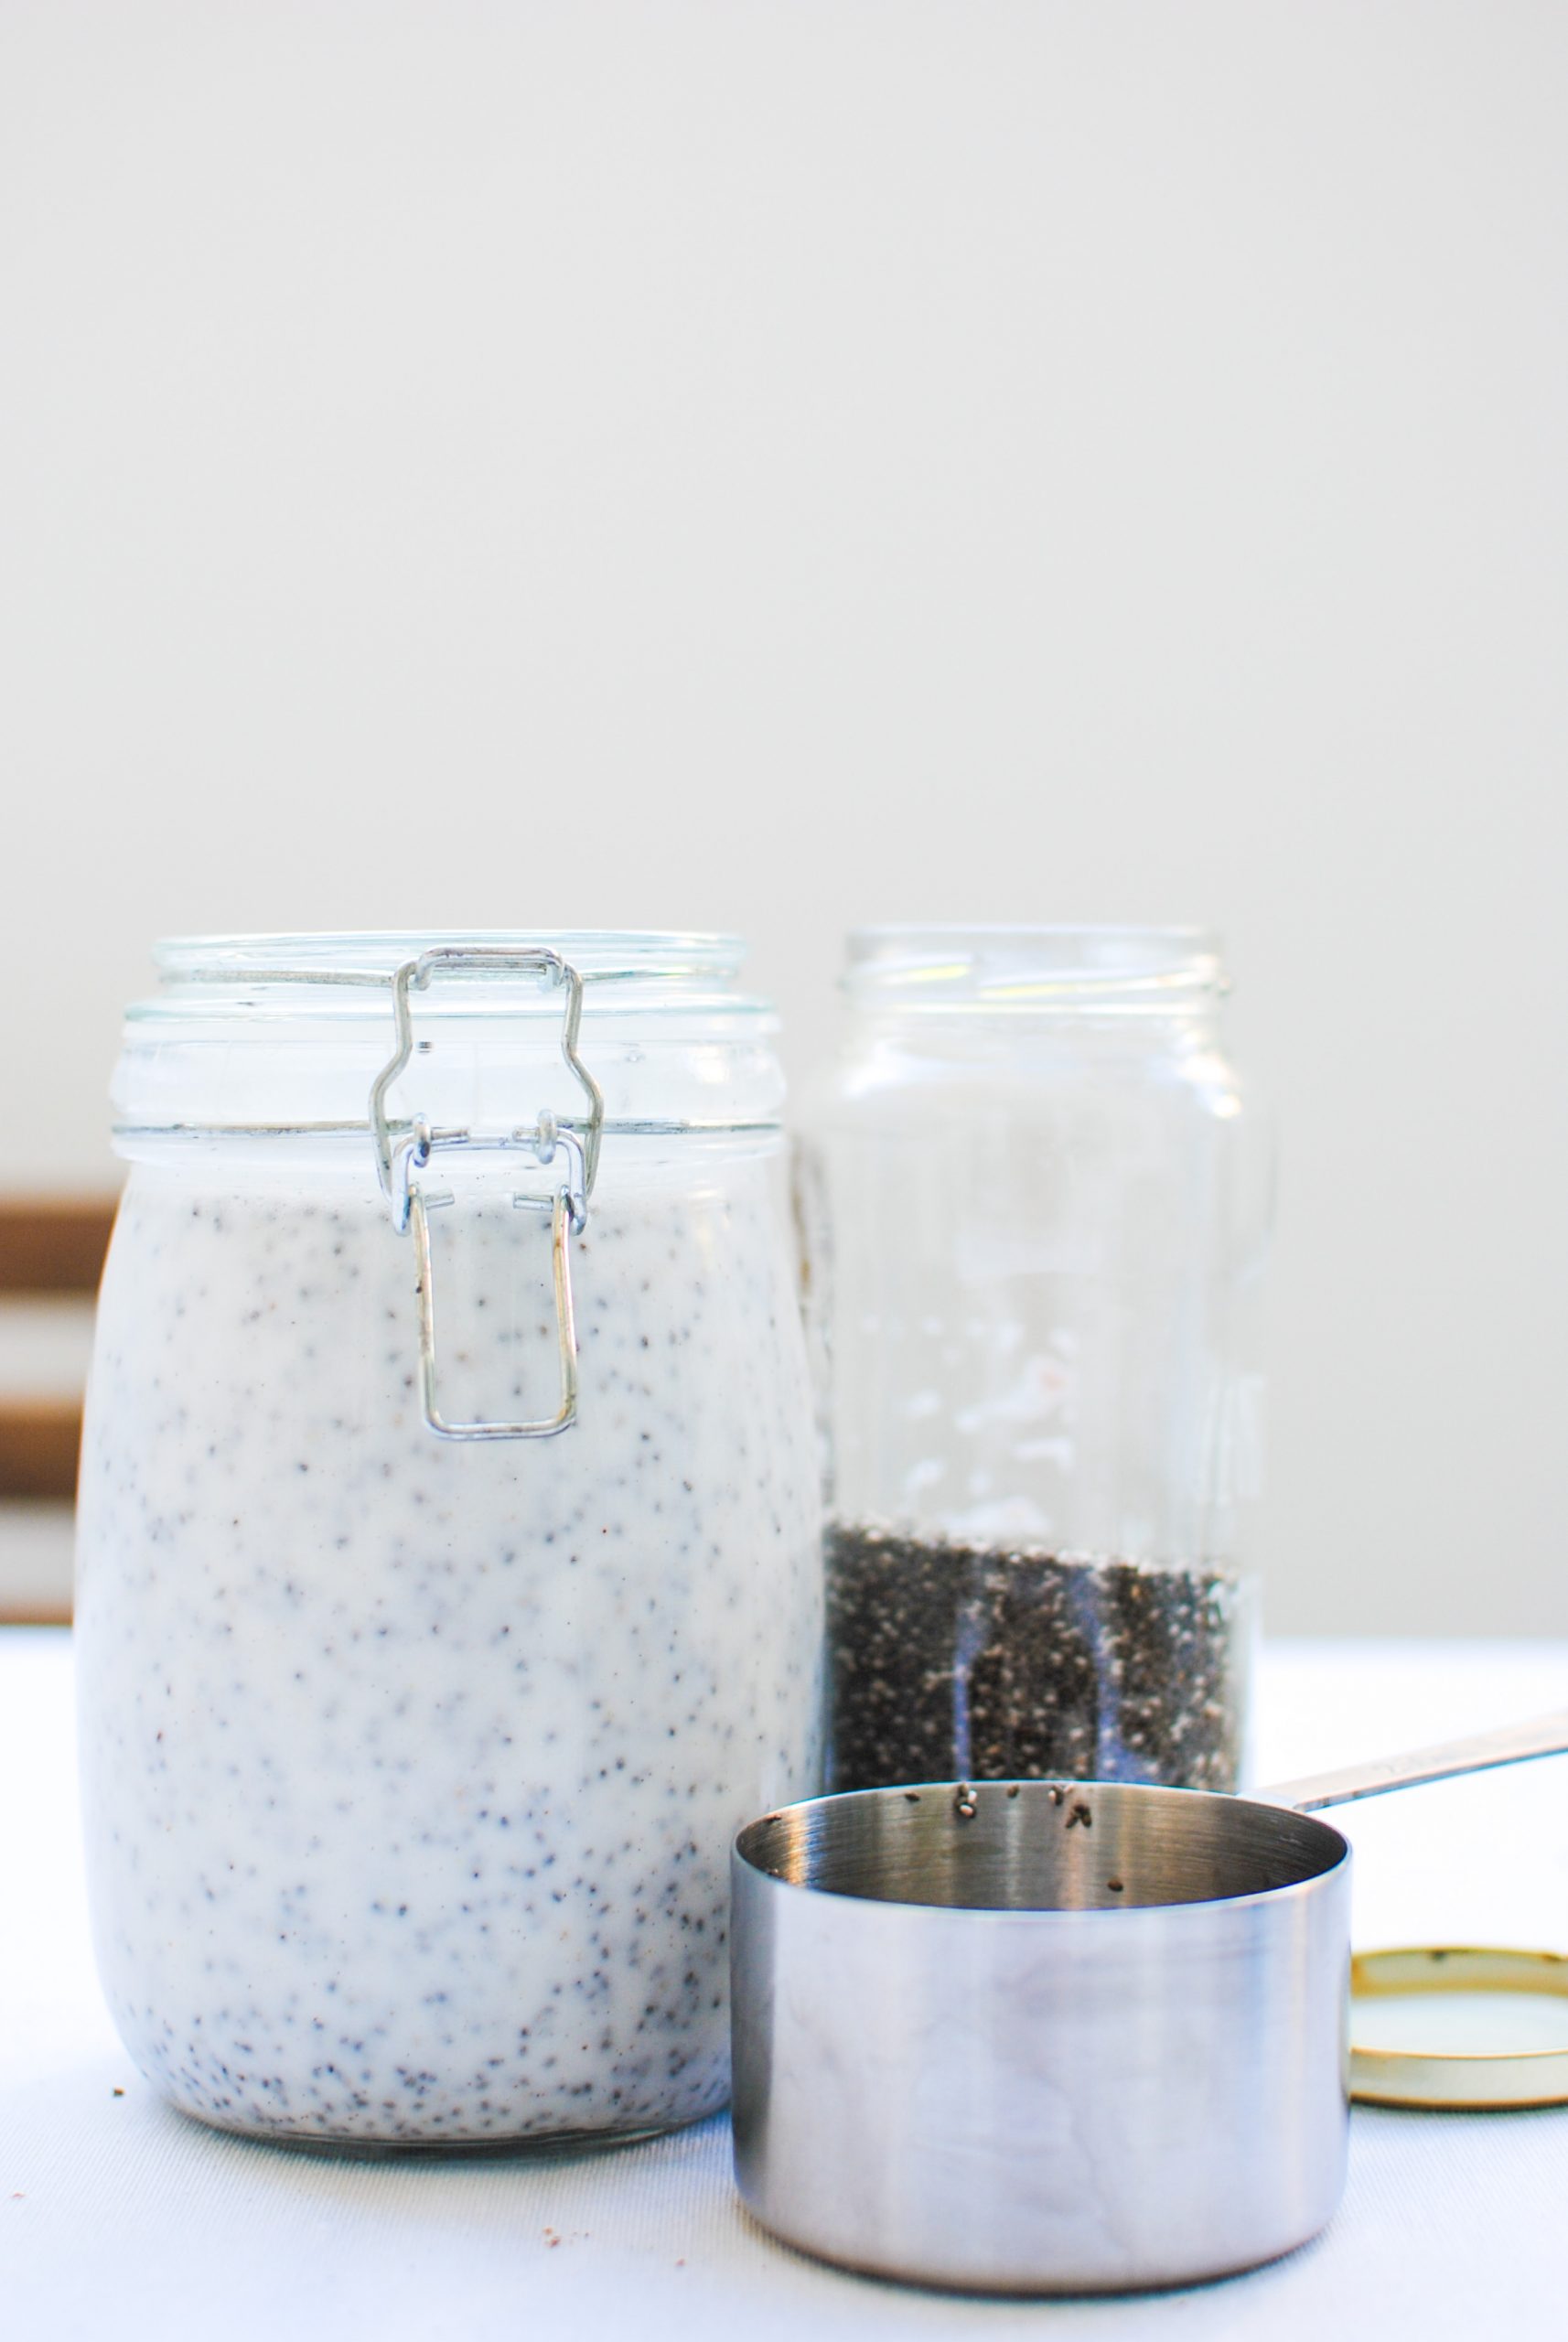 chia pudding for the week | please consider | joana limao